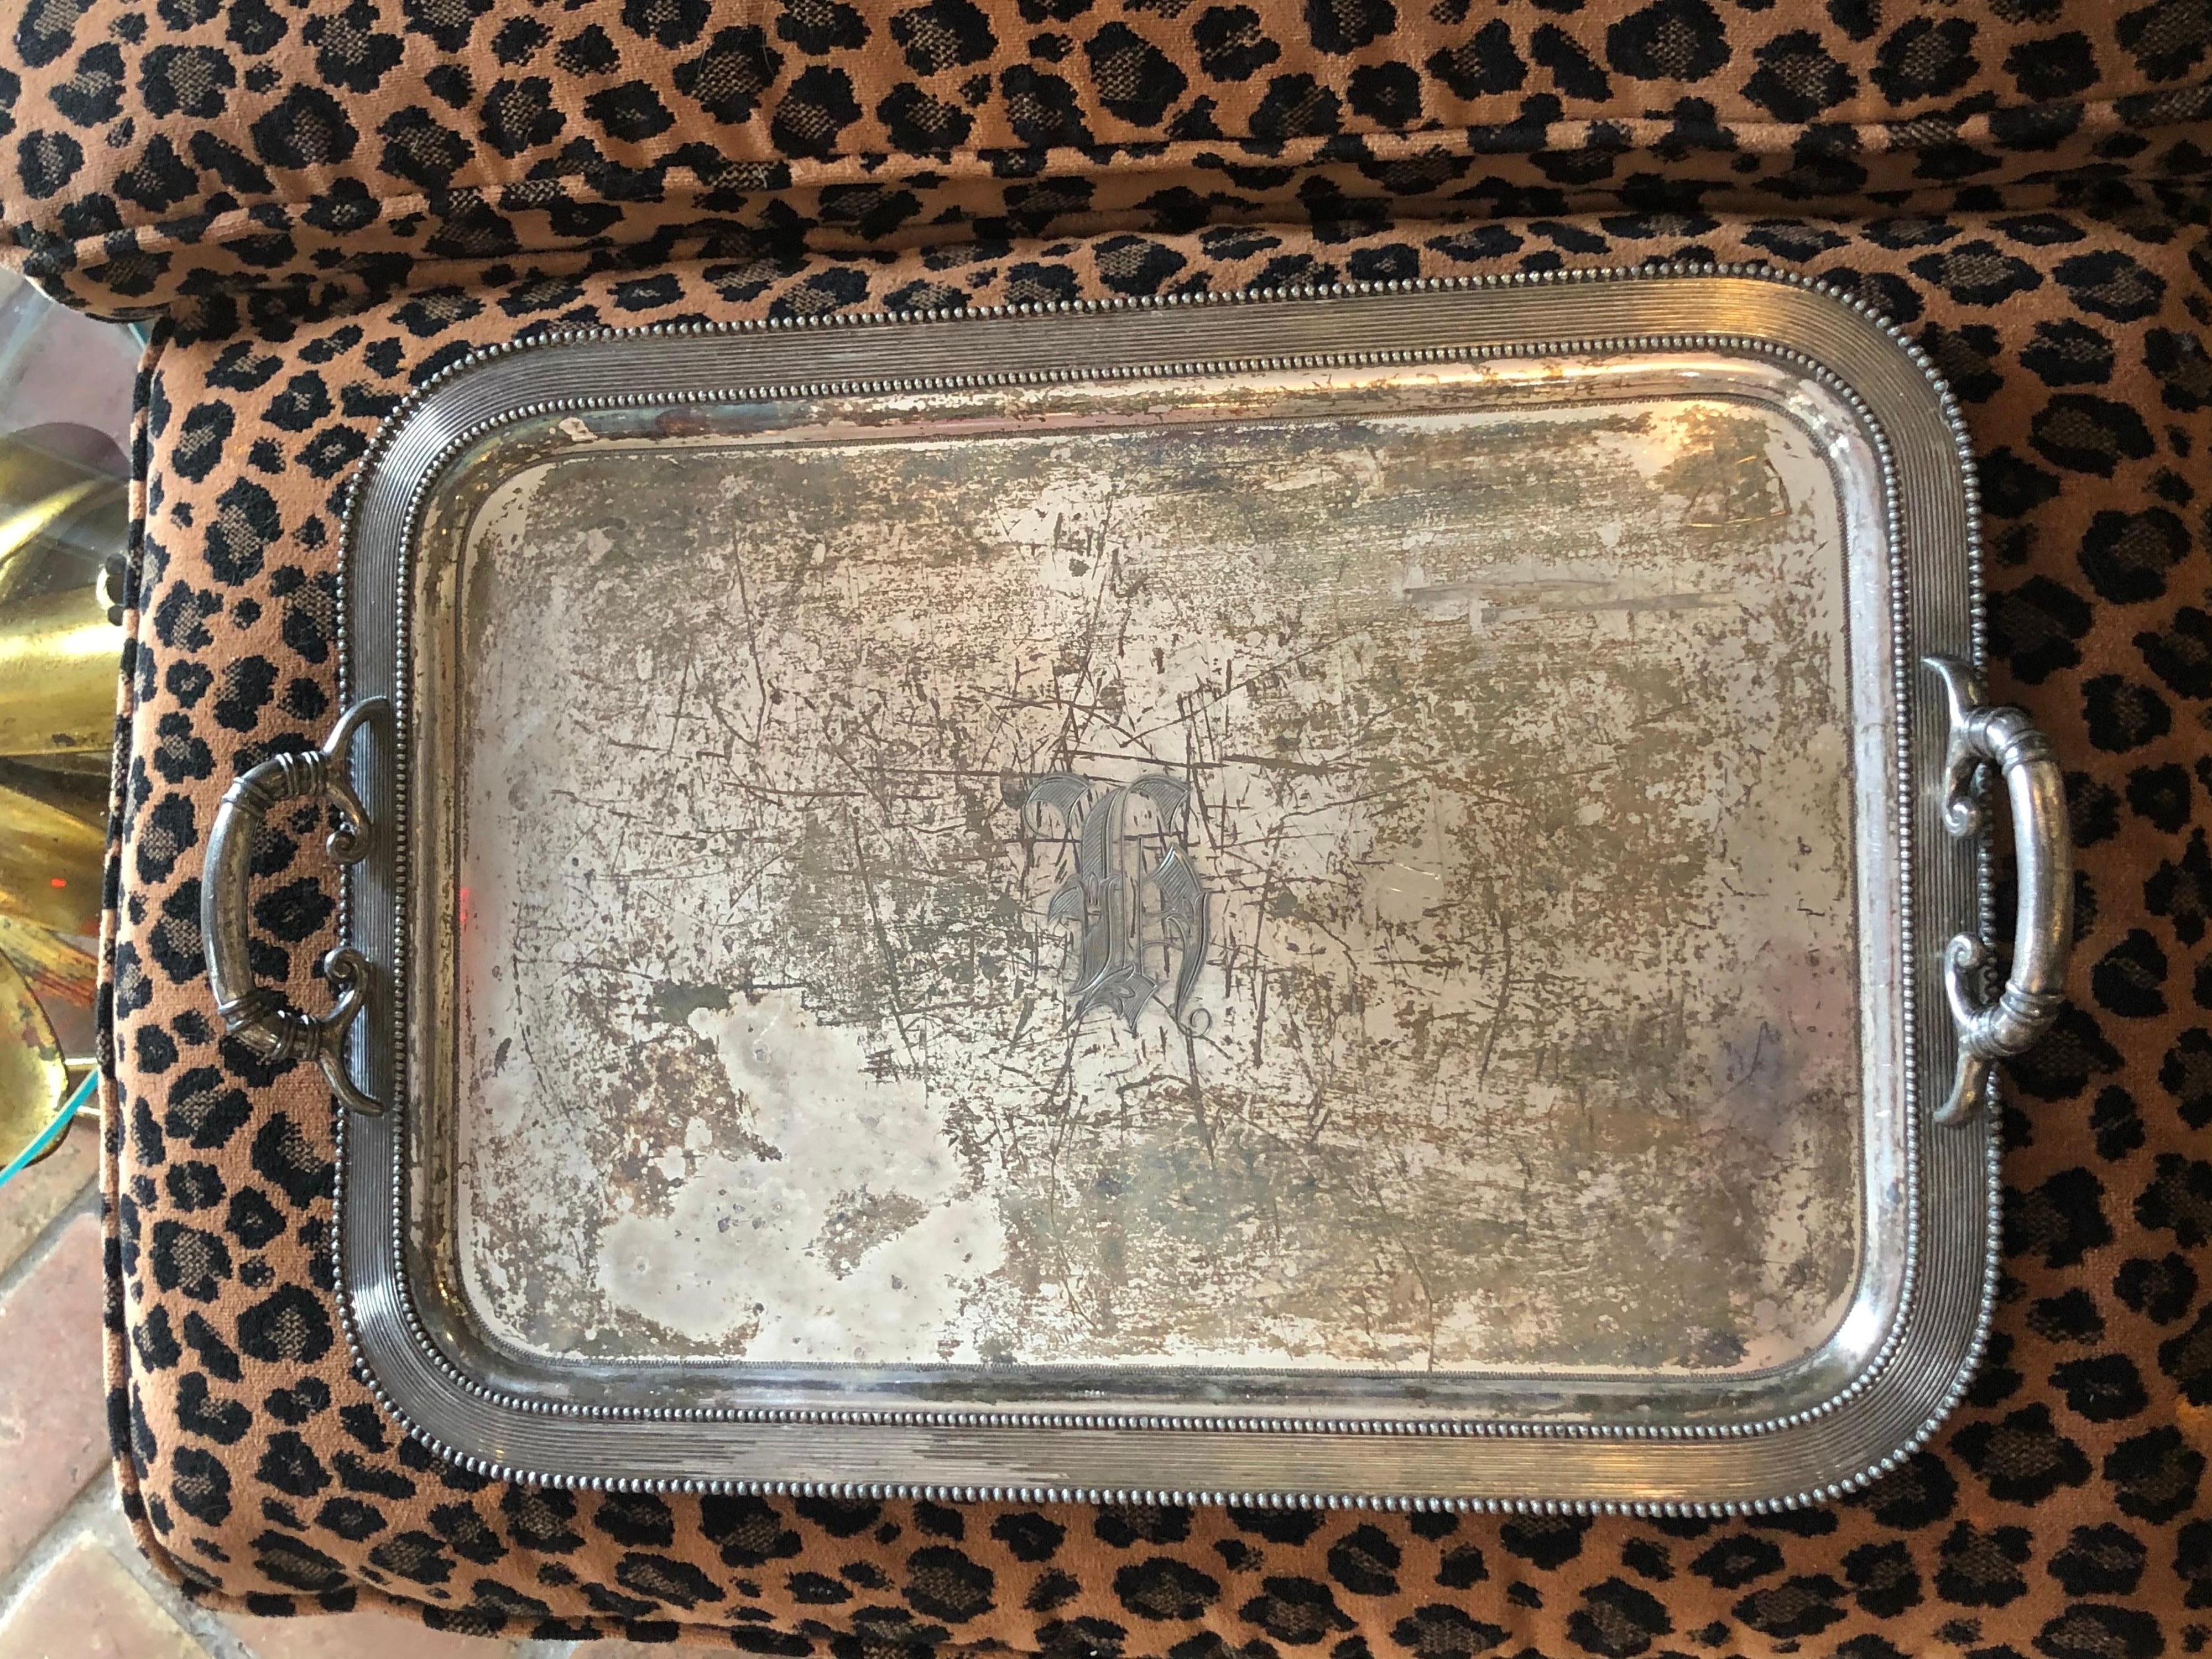 Victorian monogrammed Quadruple plated Silver serving tray. This item has been heavily used. It has a script monogram of two letters on the the center area. It looks like possibly an 